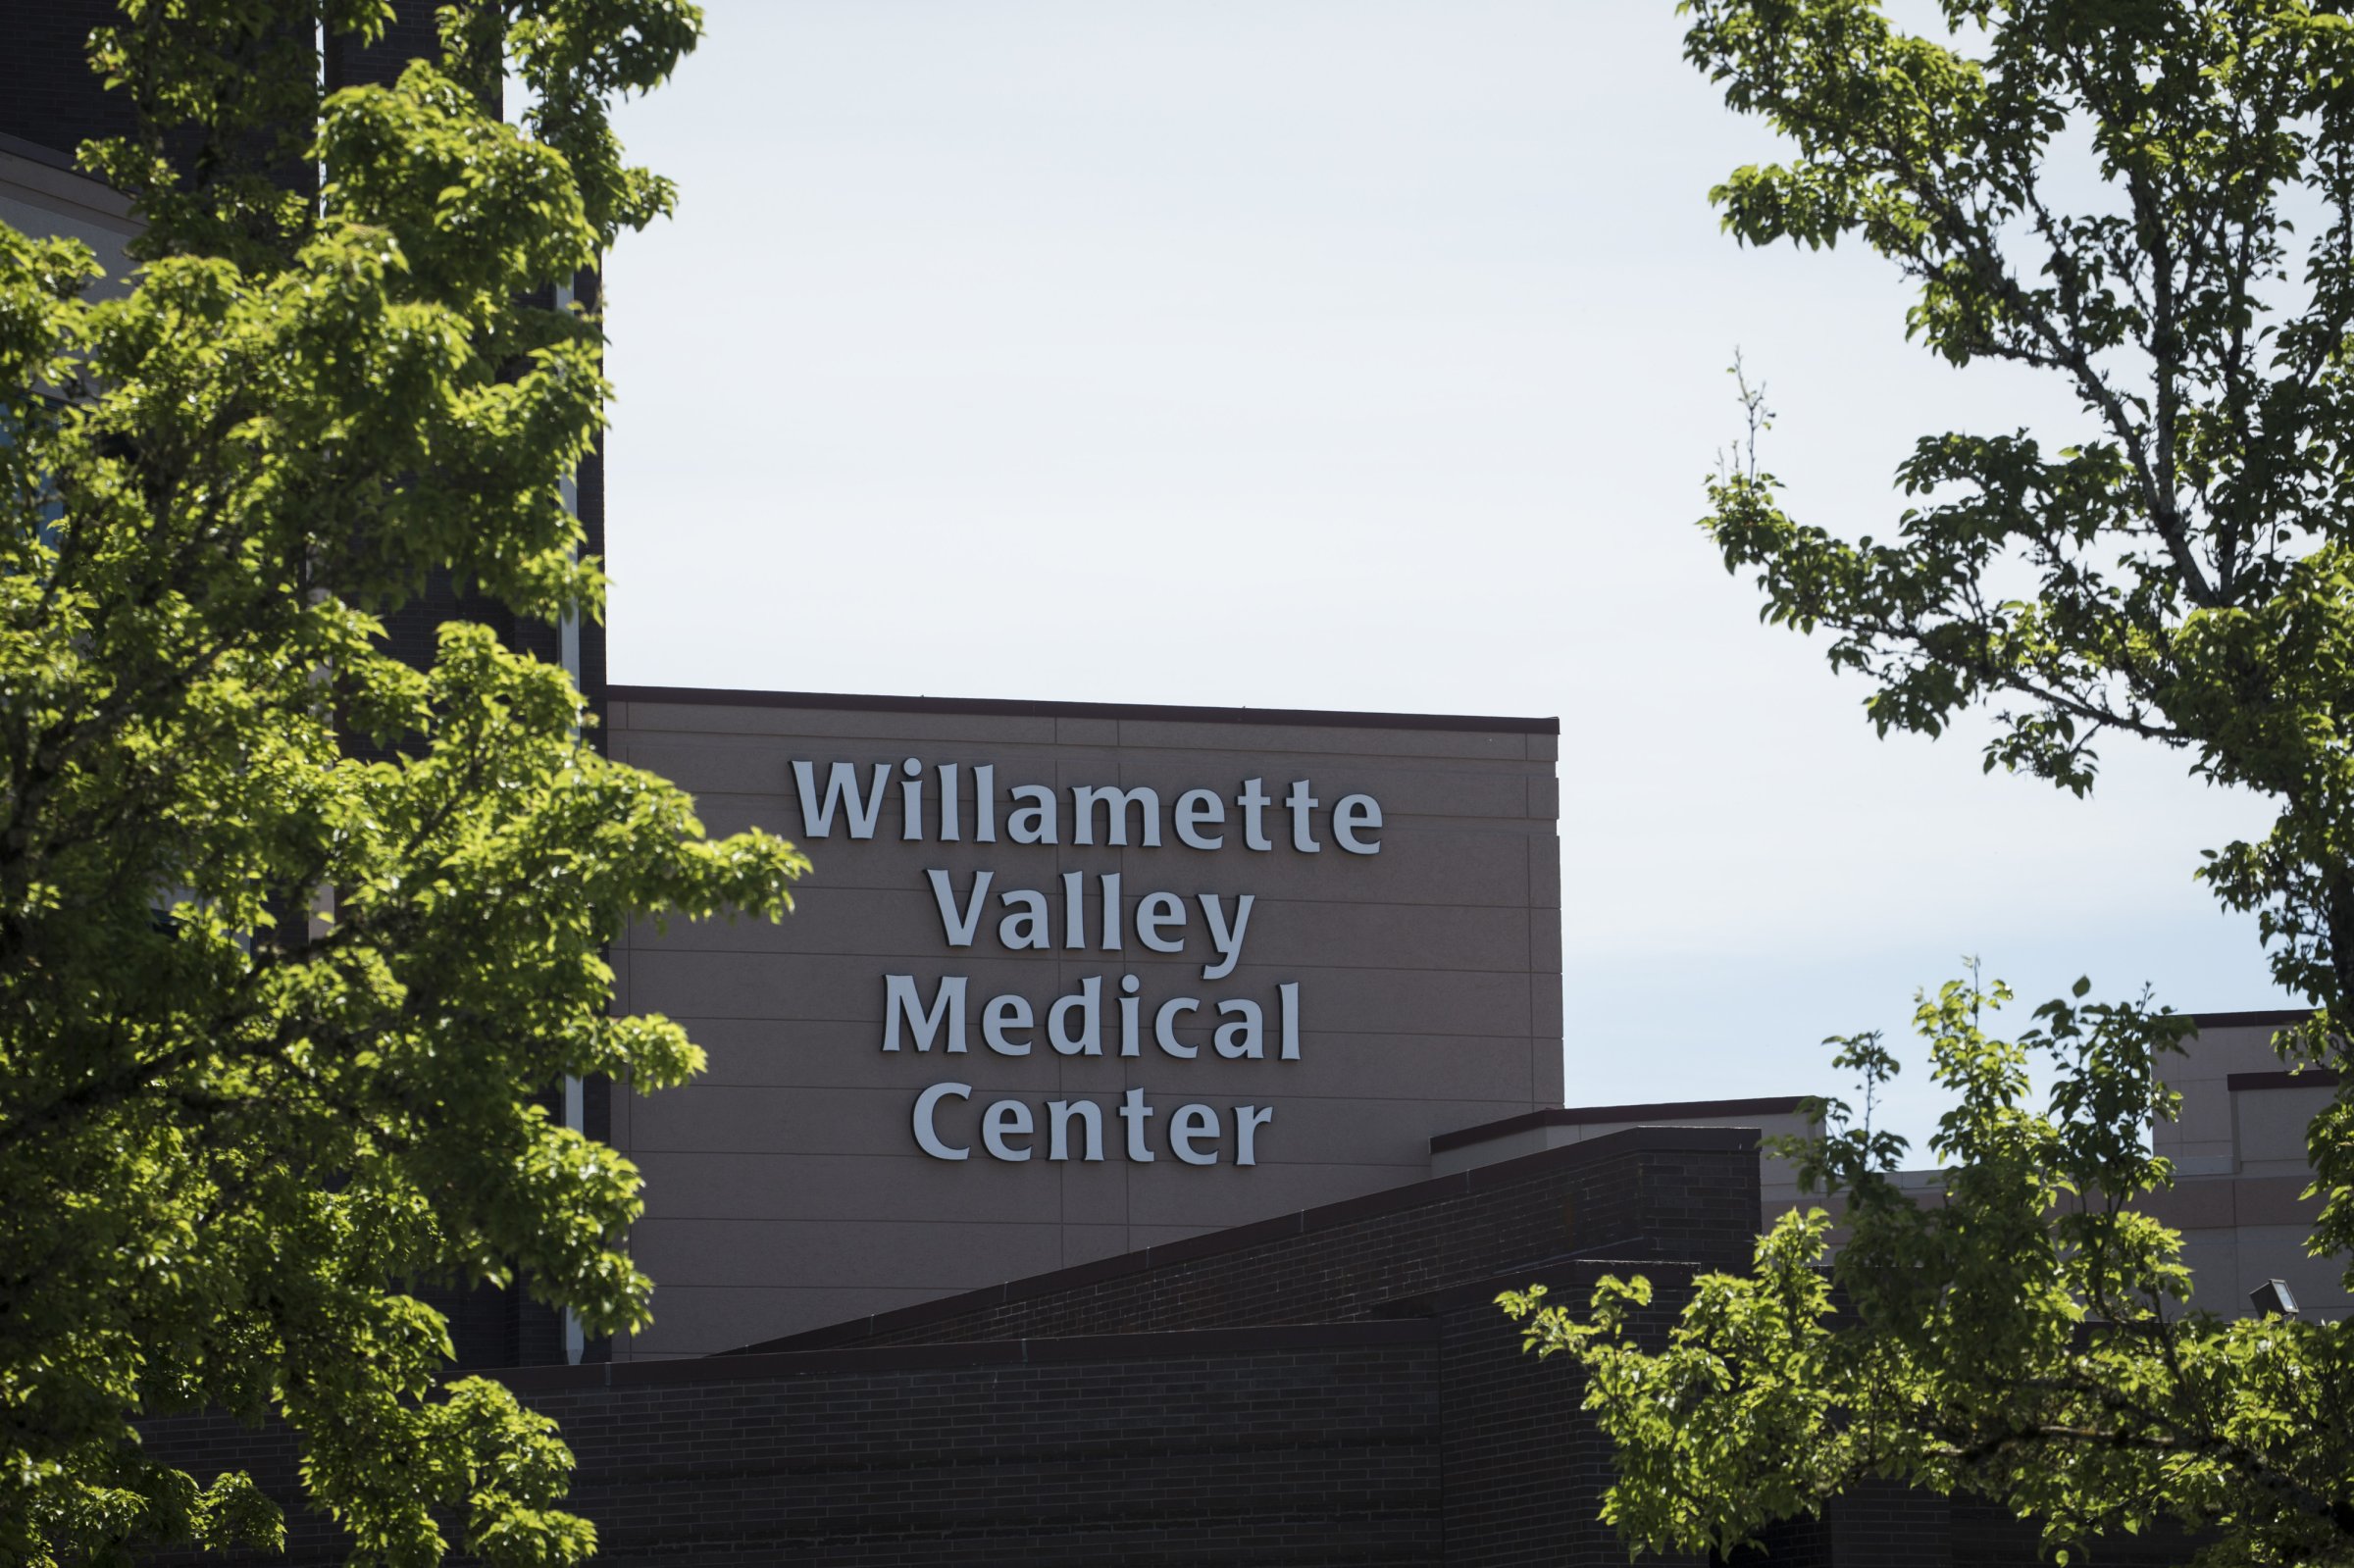 A sign of Willamette Valley Medical Center, a subsidiary of LifePoint Health Inc., in McMinnville, Oregon